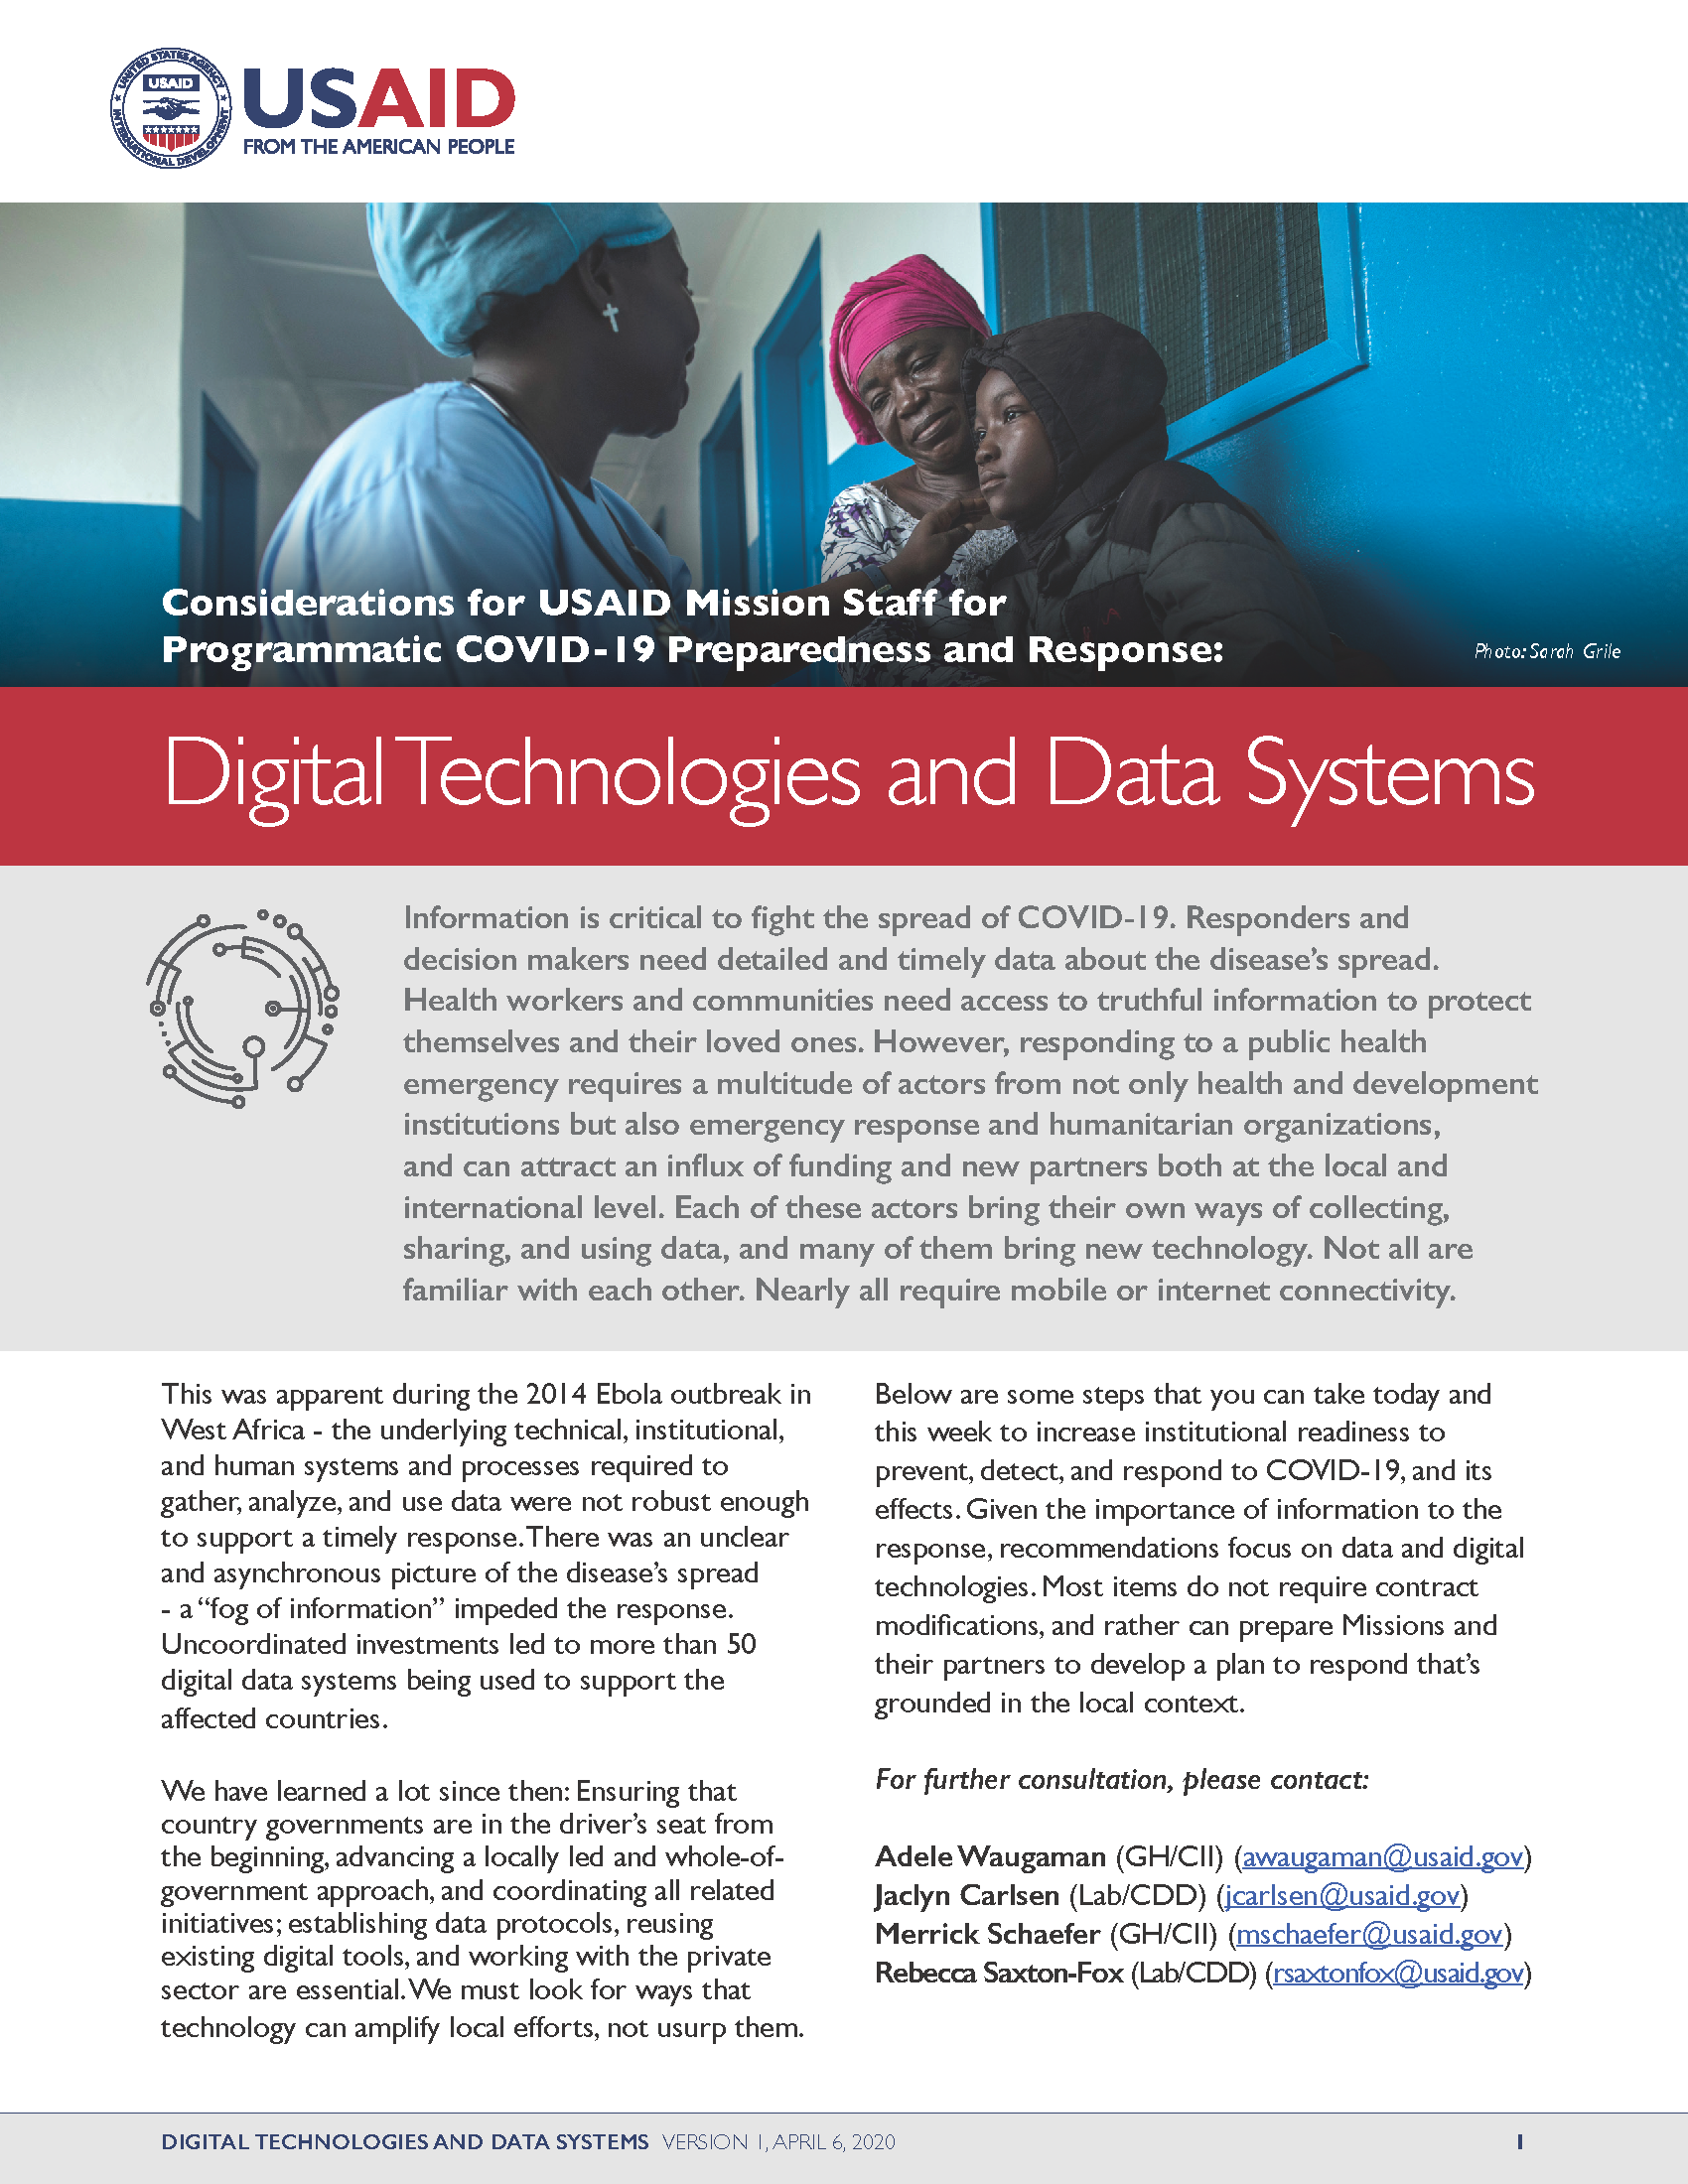 Digital Technologies and Data Systems